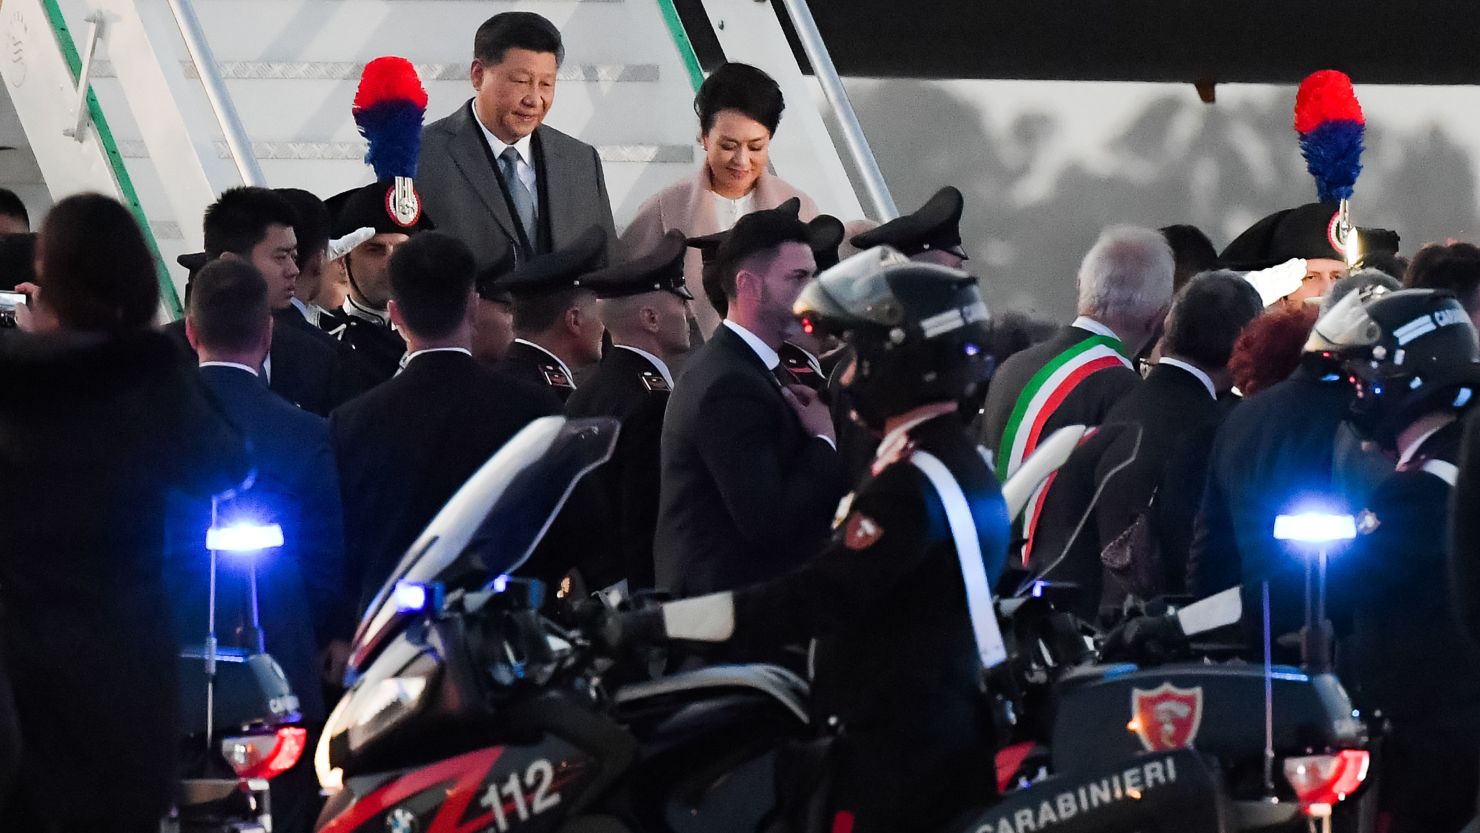 China's President Xi Jinping and his wife Peng Liyuan arrive in Rome on Thursday.